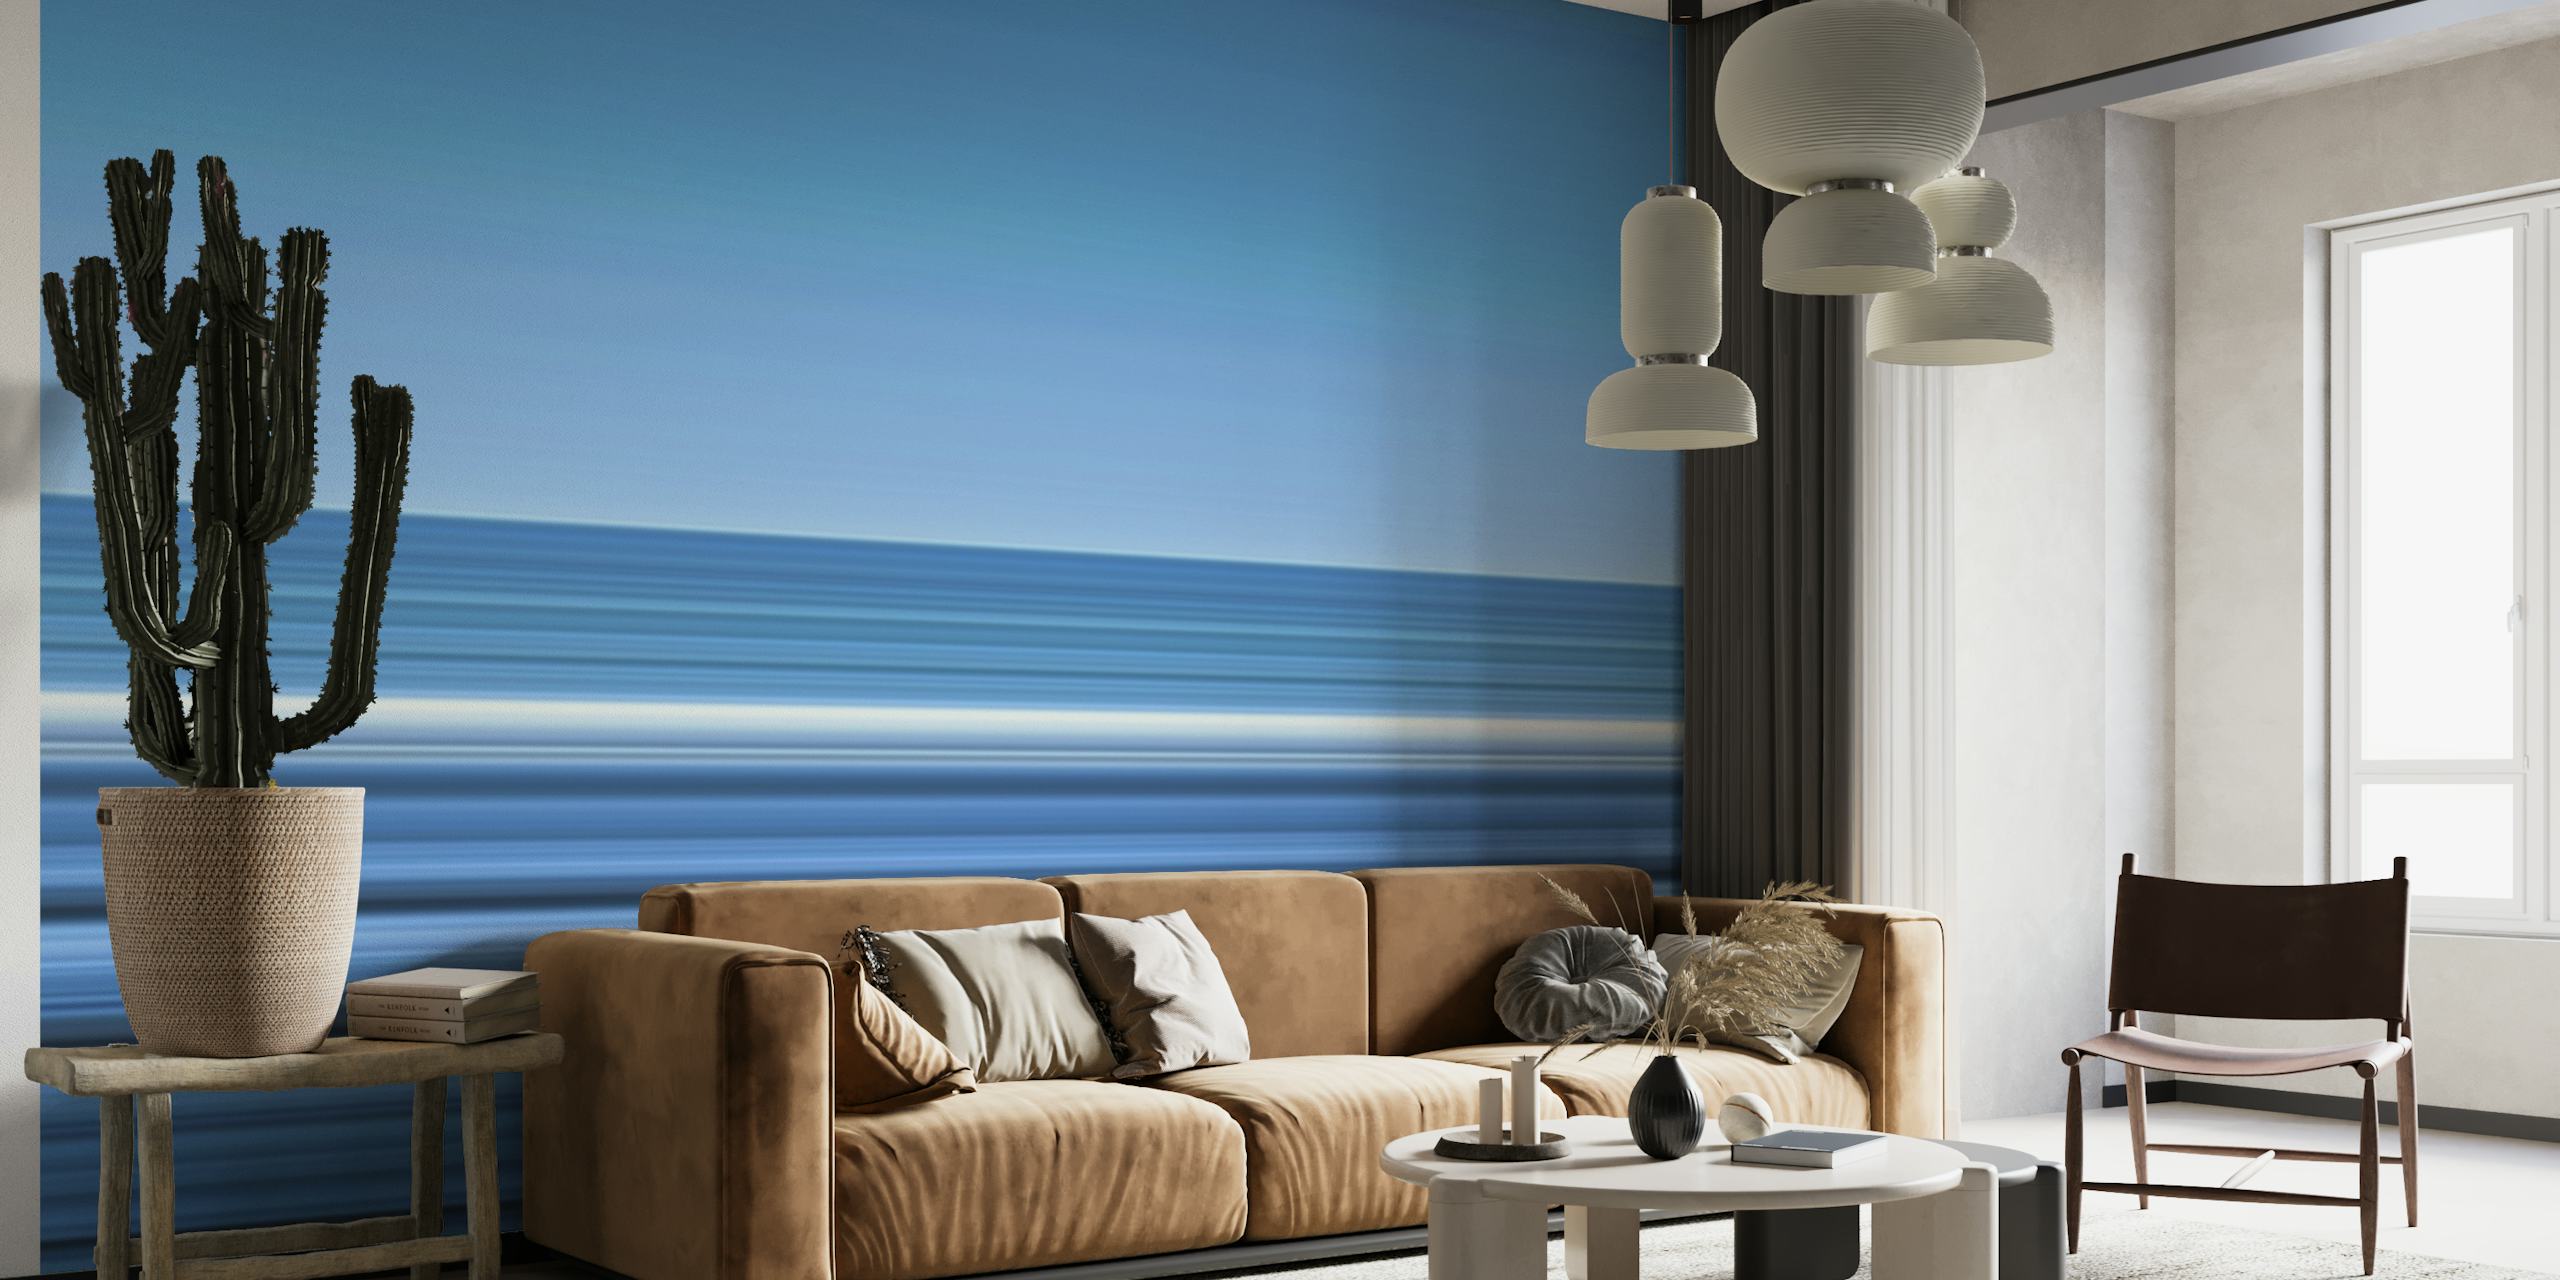 Abstract 'Linje Cas Abao Beach' wall mural depicting serene blue horizontal stripes.